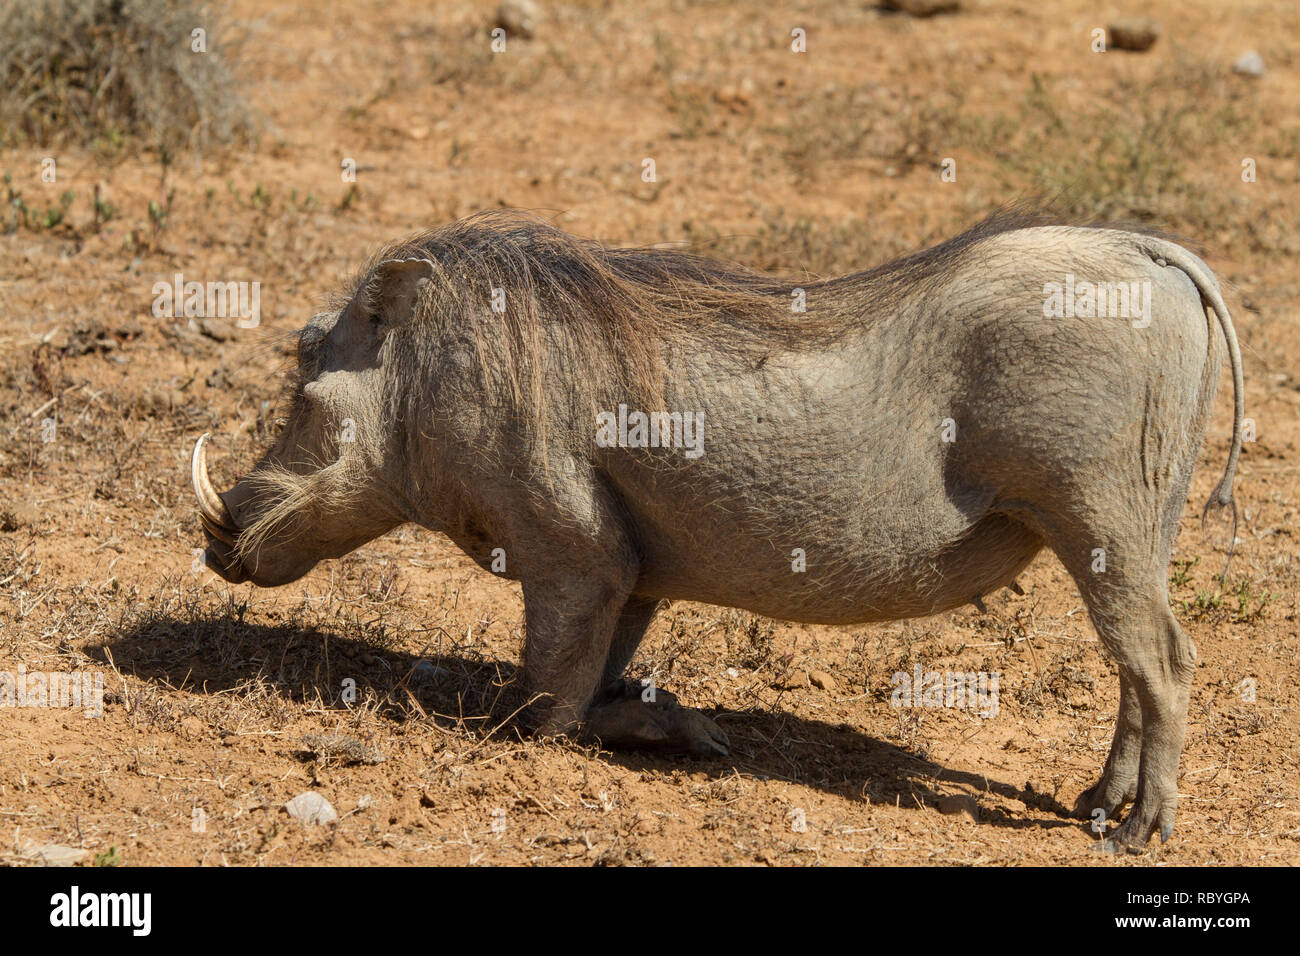 Warthog (Phacochoerus africanus) bending down on its knees to get closer to food, Addo Elephant National Park, South Africa Stock Photo